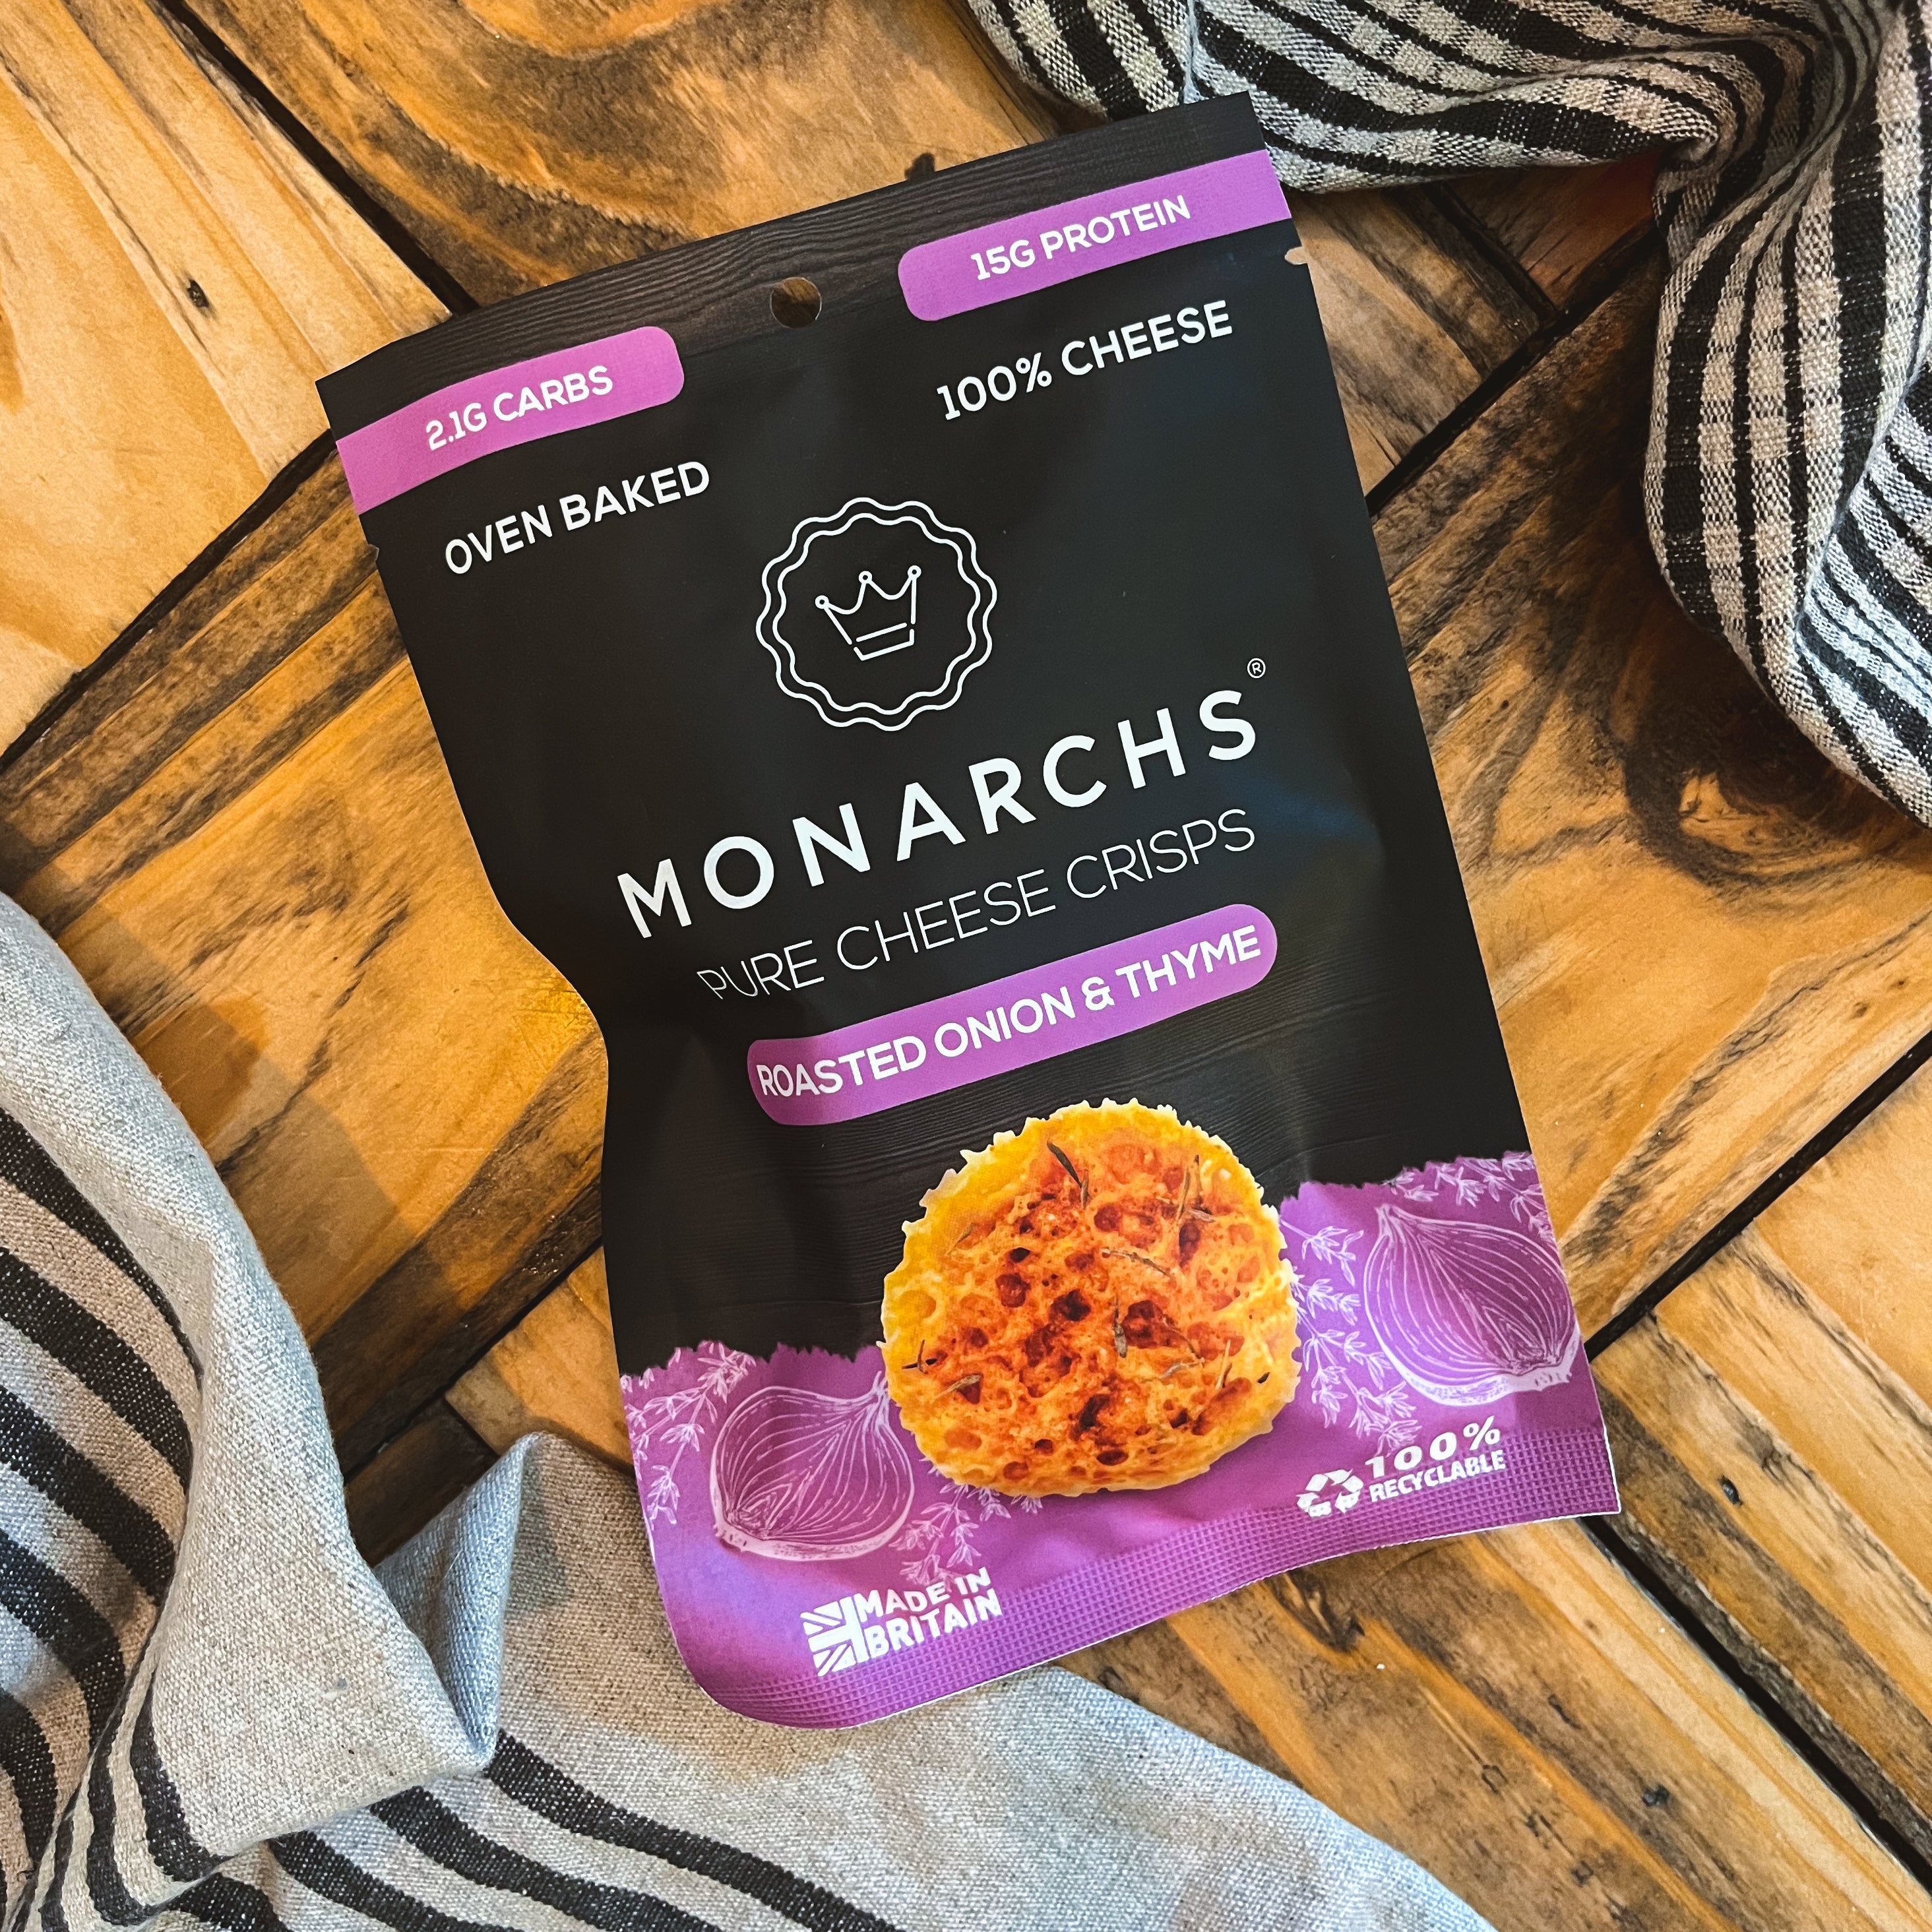 Roasted Onion & Thyme Cheese Crisps 32g - Monarchs